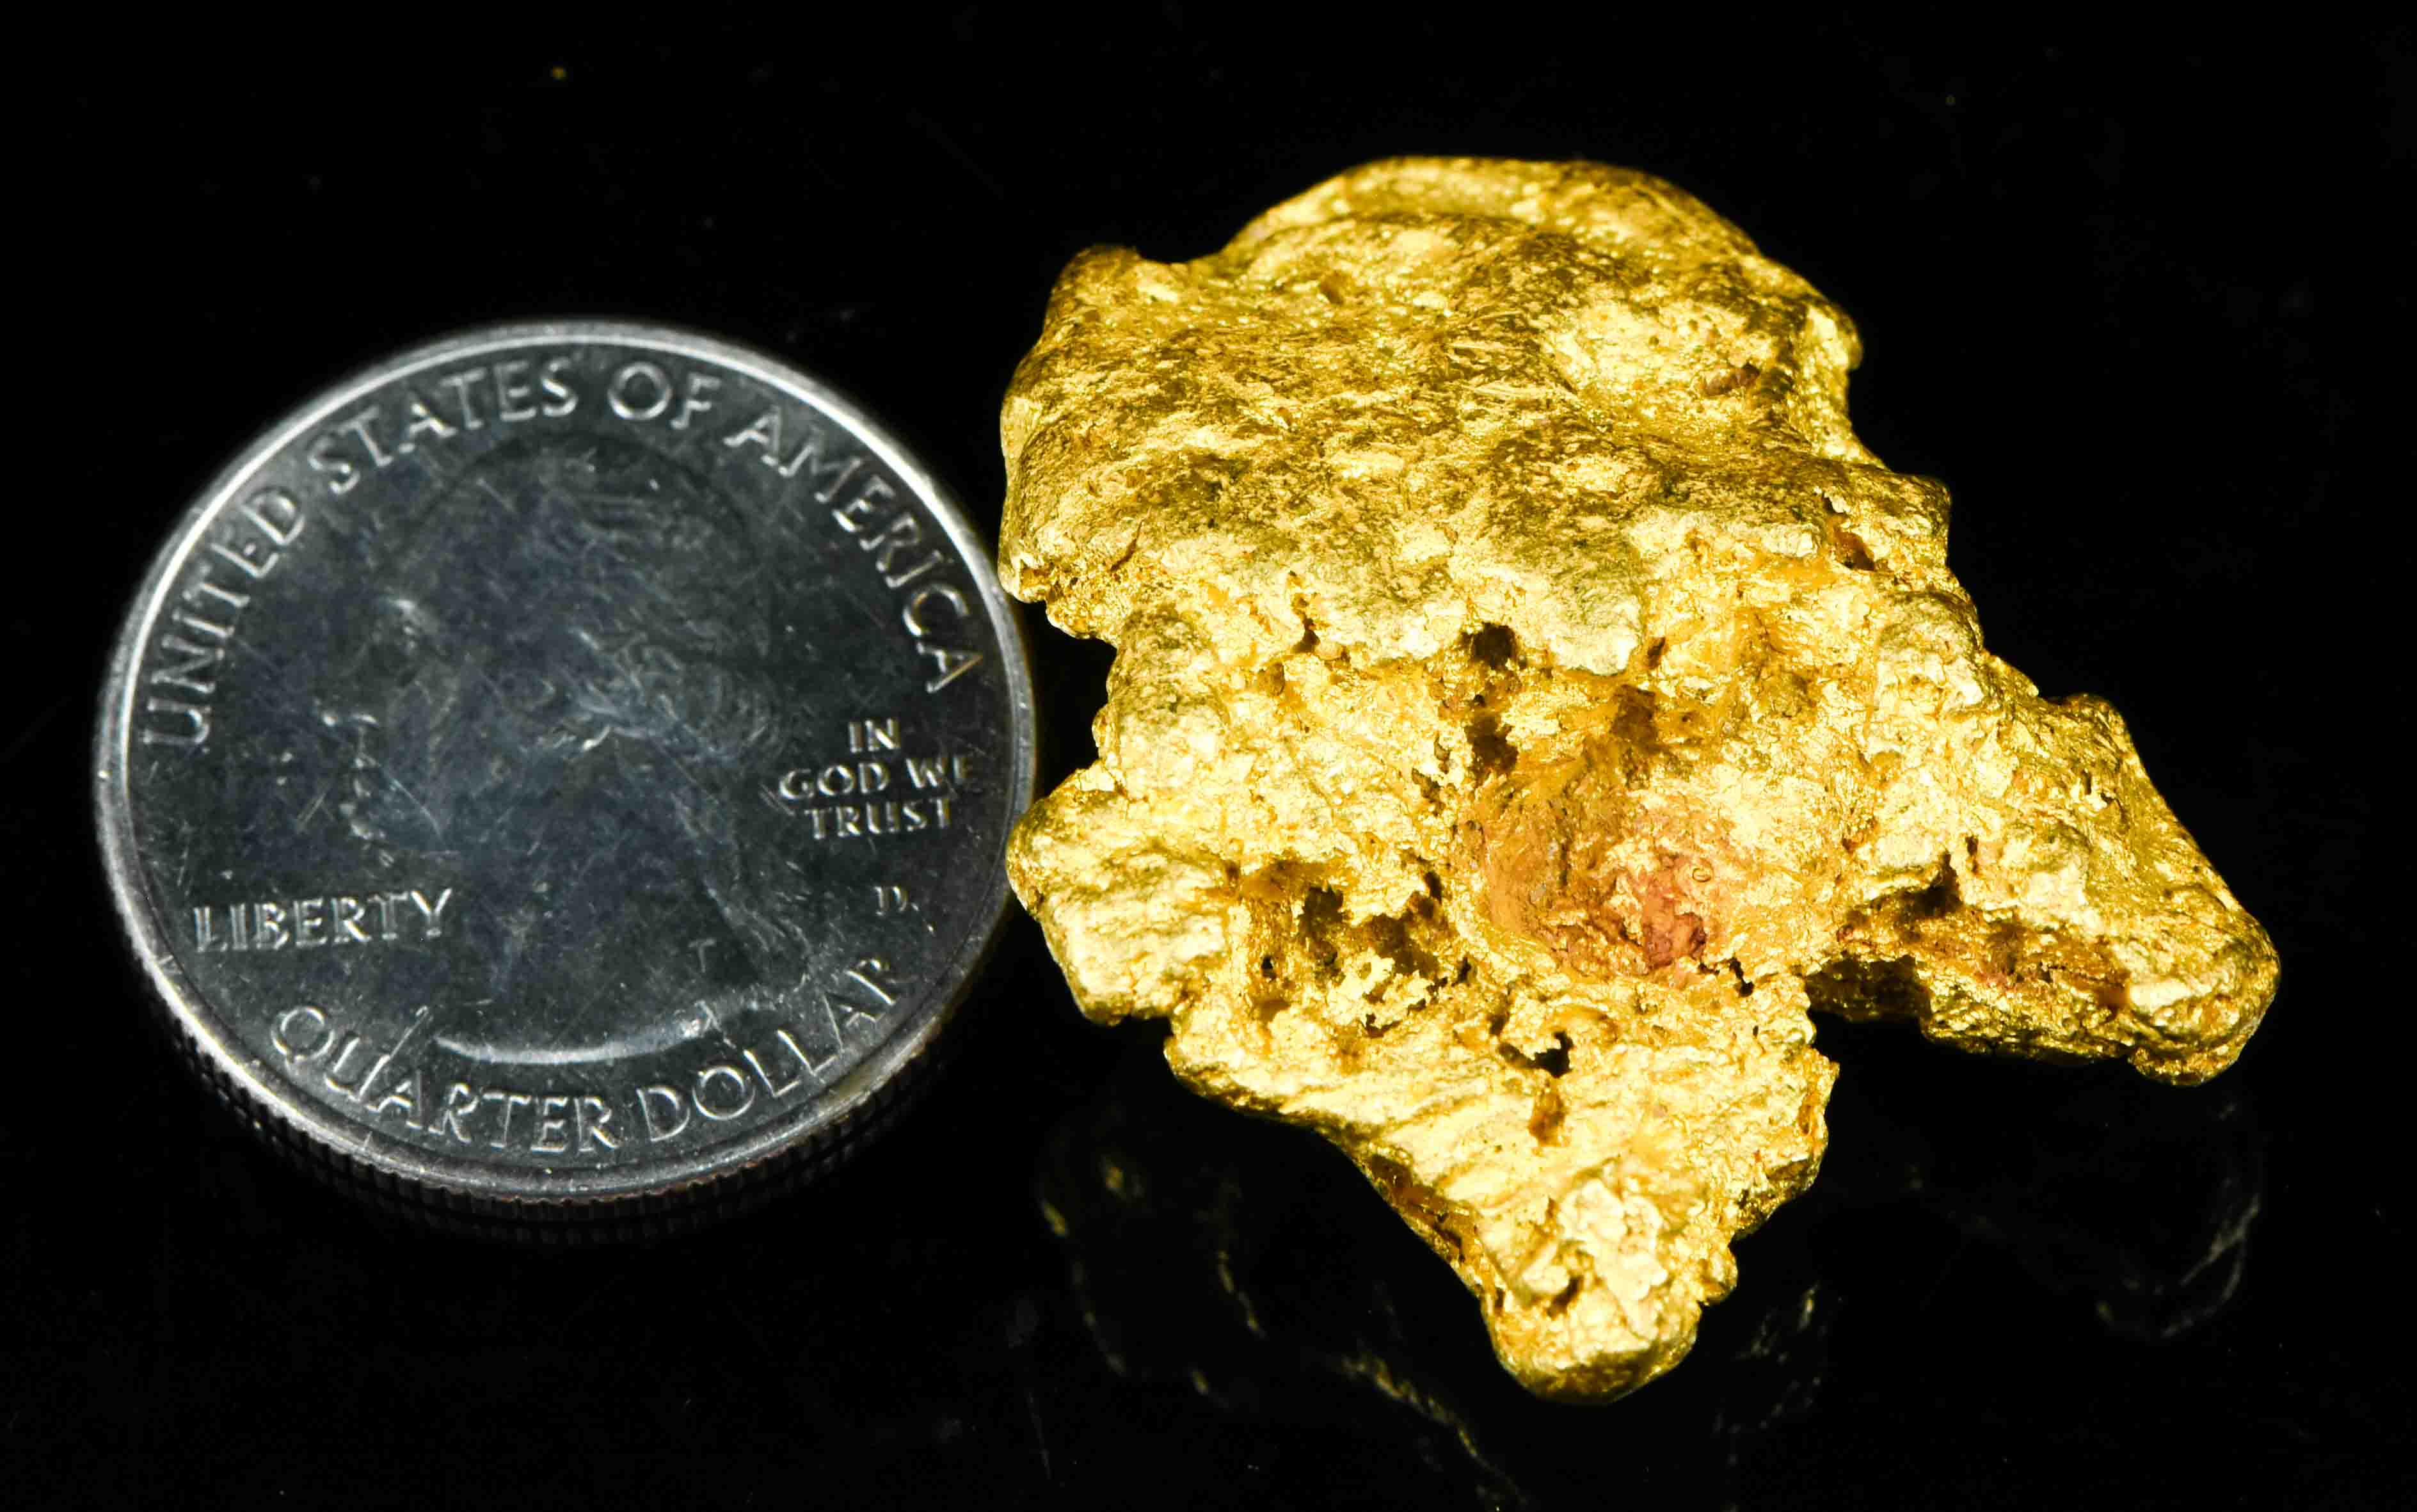 Large Natural Gold Nugget Australian 58.17 Grams 1.87 Troy Ounces Very Rare